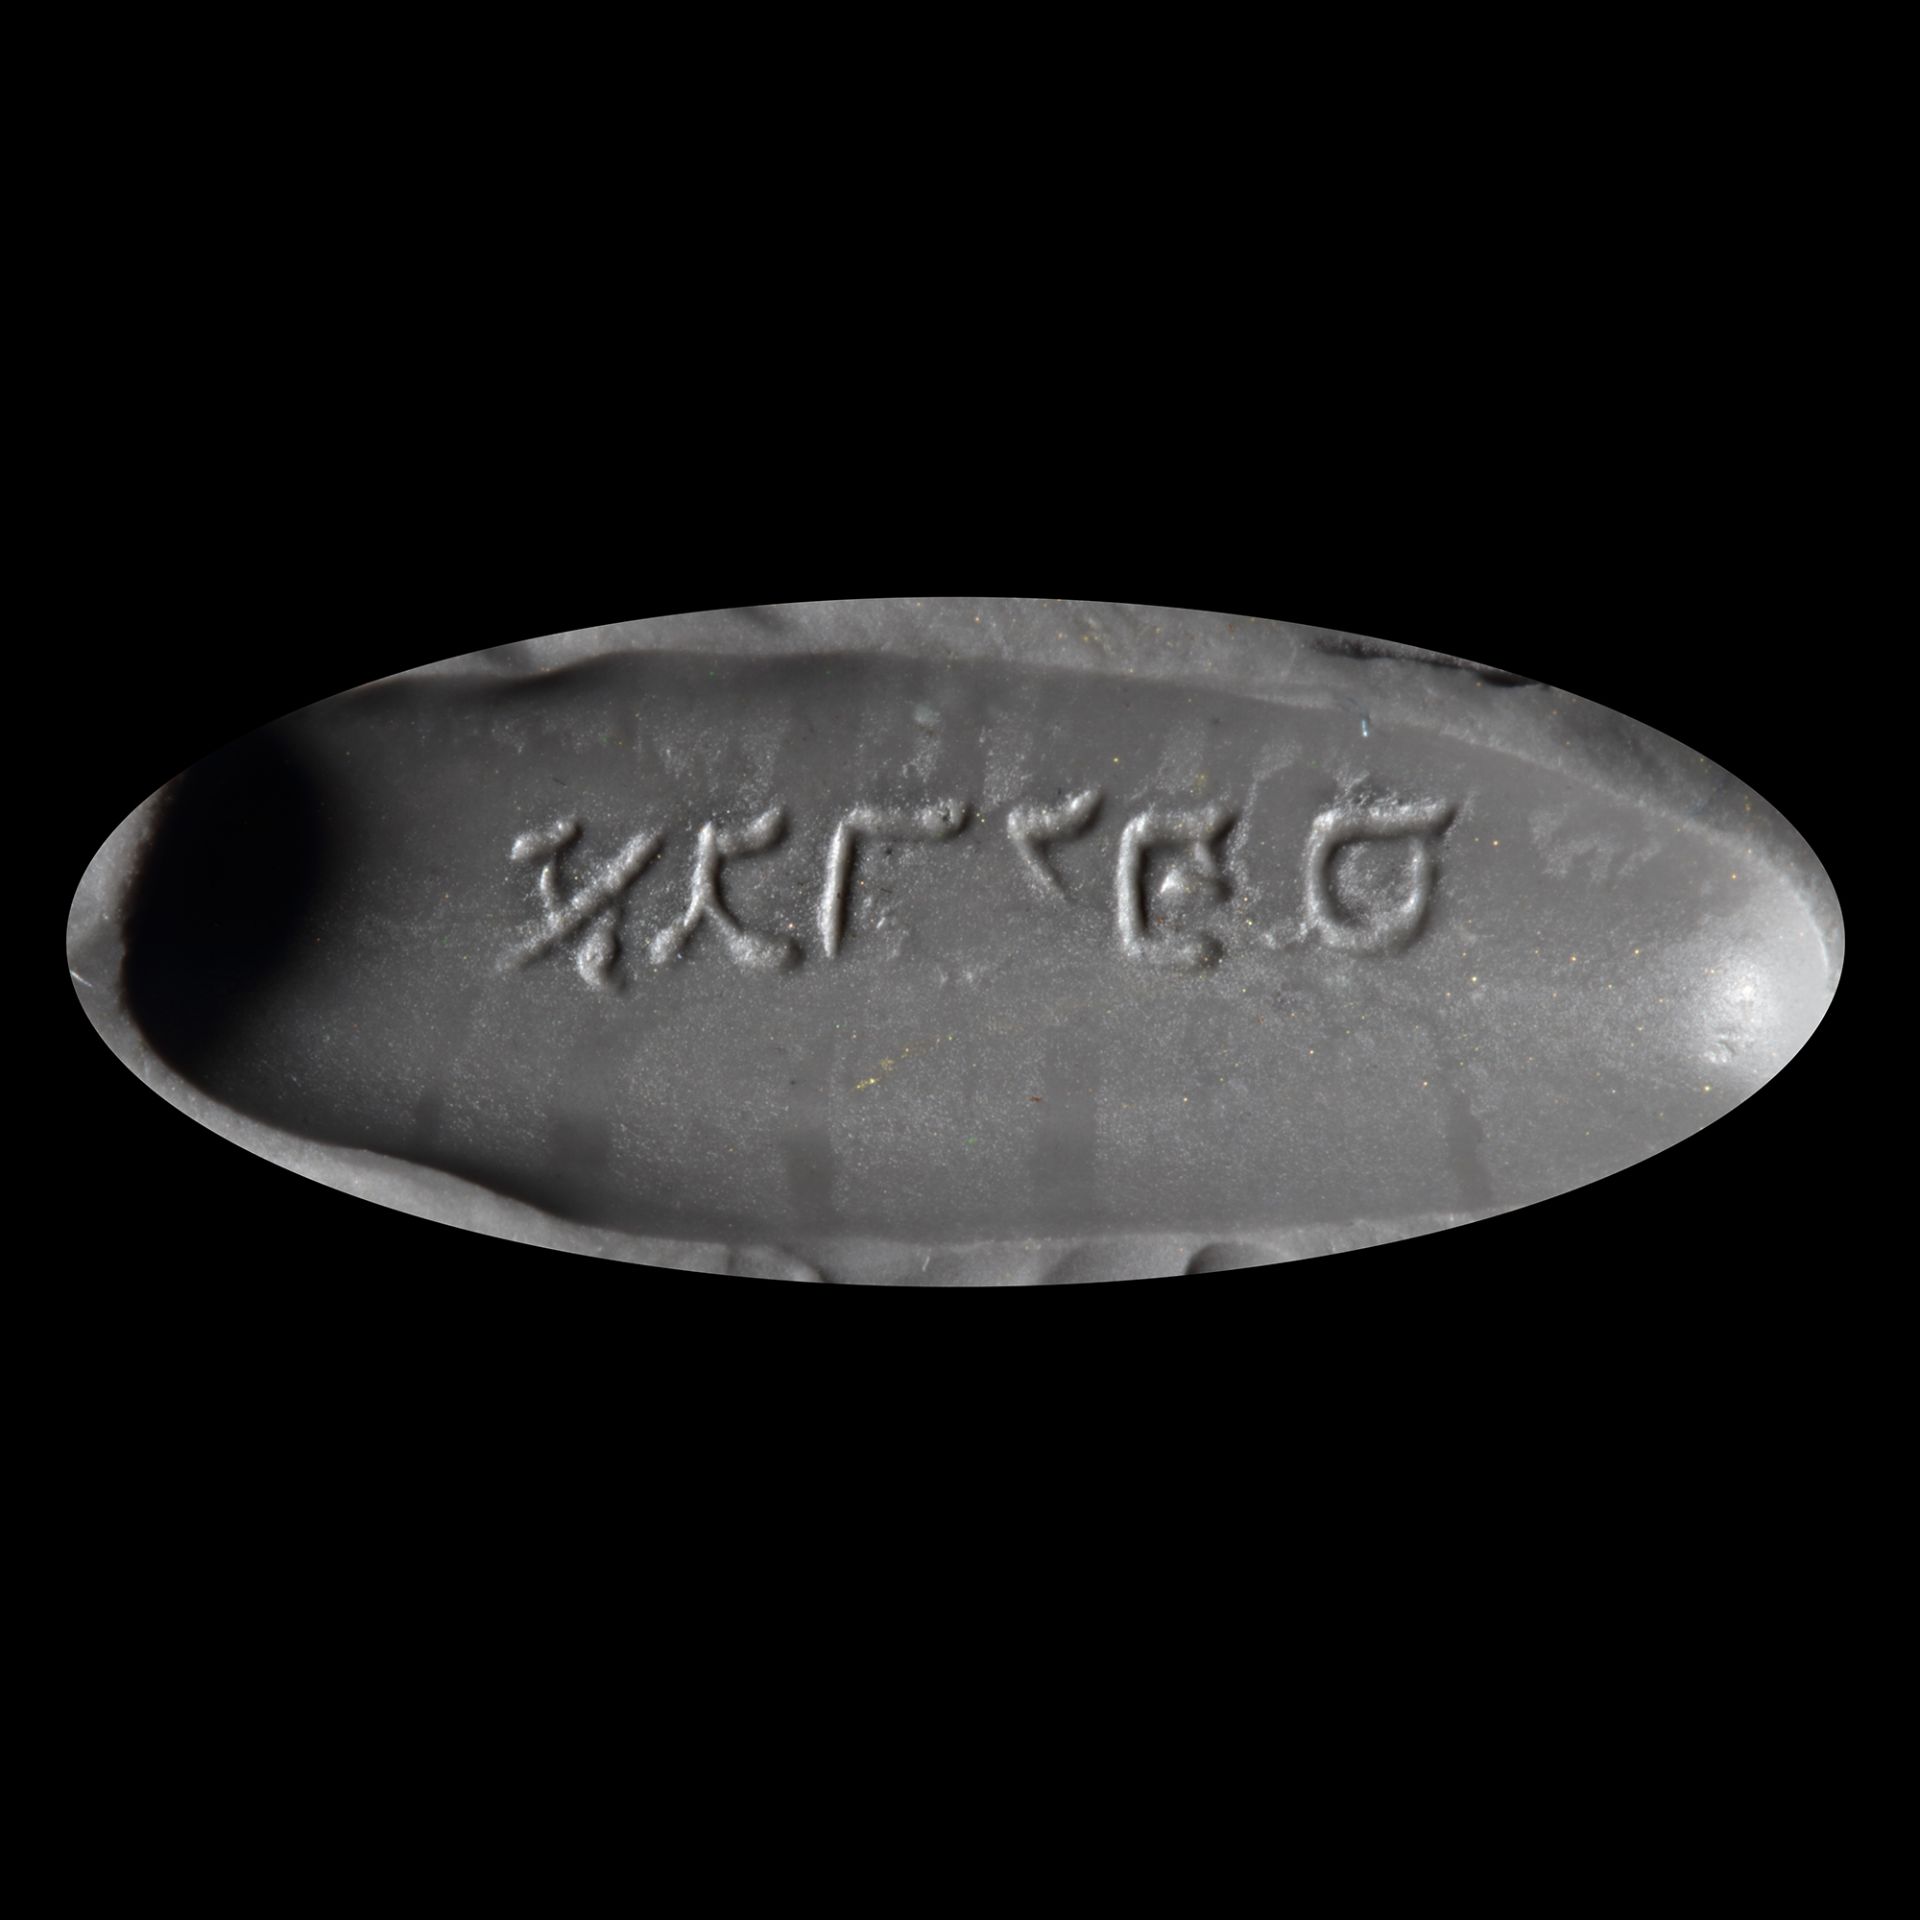 A HAEMATITE SHEKEL WEIGHT INSCRIBED 'AGRIPPAS" IN HEBREW, 1ST CENTURY AD - Image 2 of 2